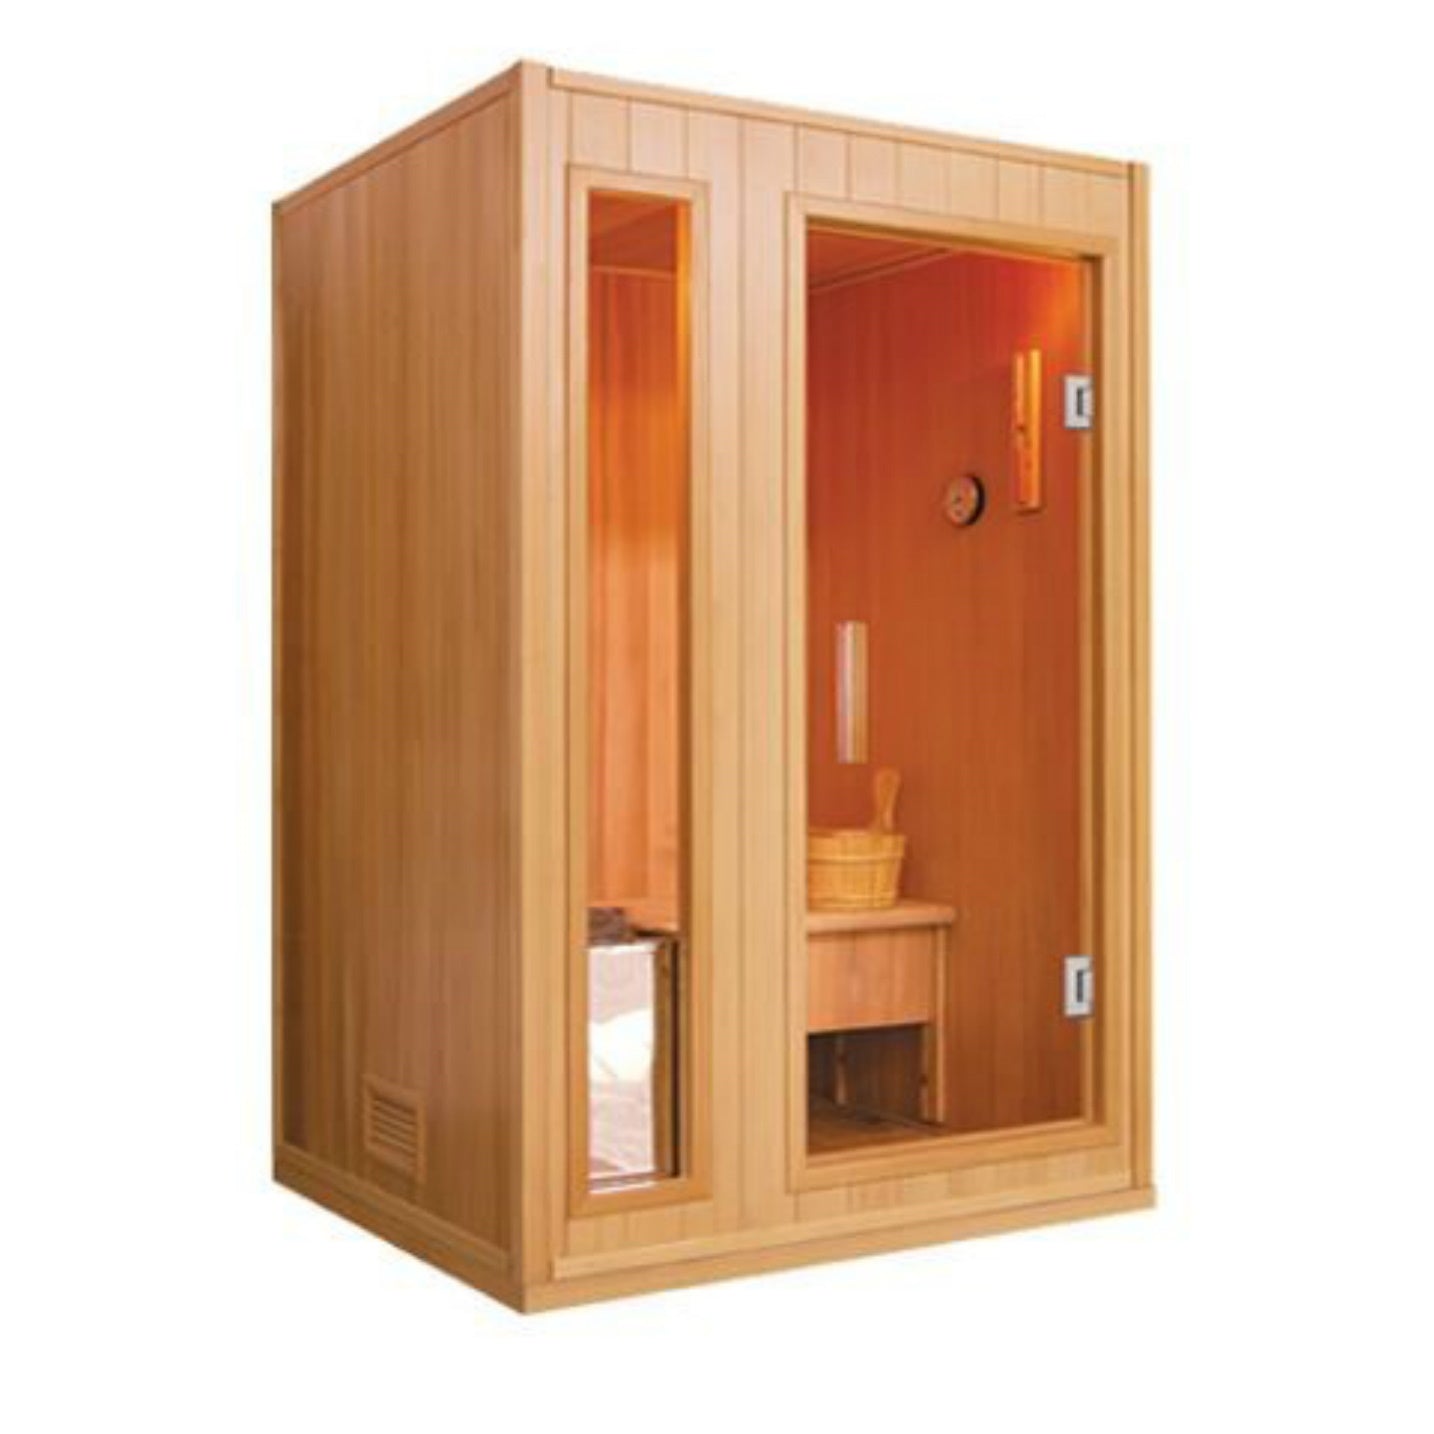 SunRay Sauna Baldwin 2 Person Traditional Sauna - Canadian Hemlock Construction with tempered glass door, Hygrometer/Sand Timer, Cask and Spoon - Isometric view - HL200SN